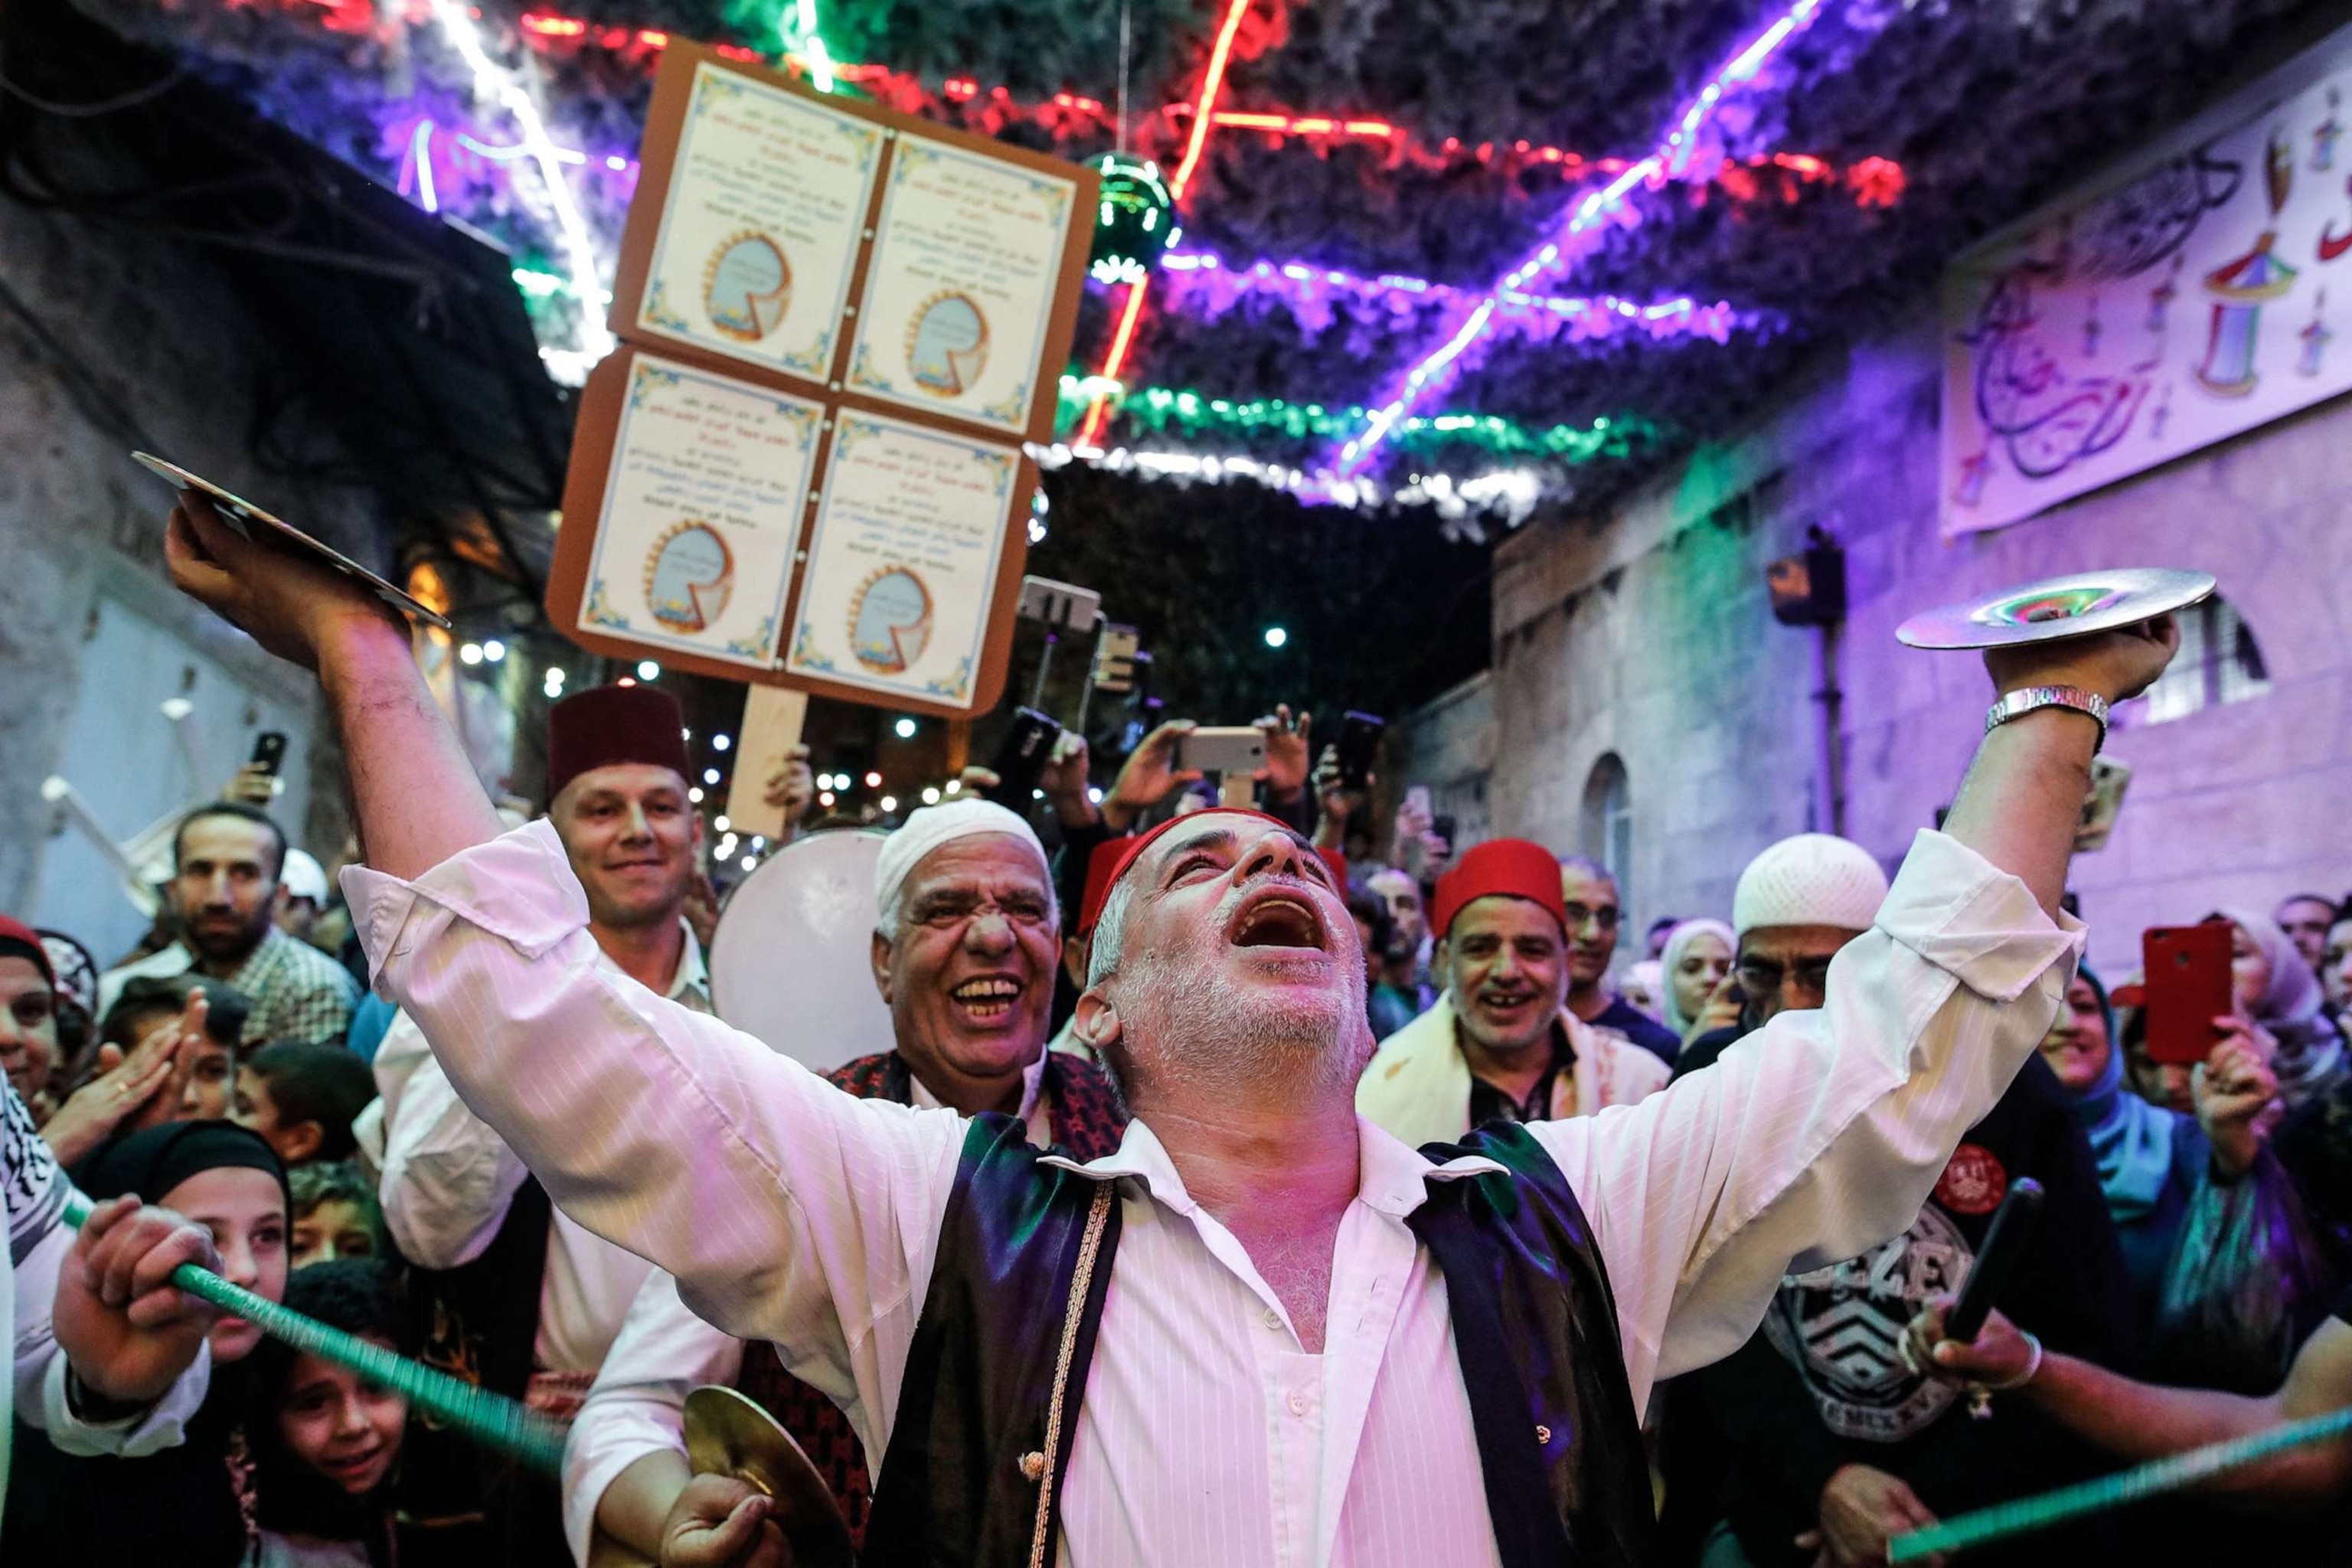 PHOTO: Palestinian musicians perform in Jerusalem's Old City to celebrate breaking the fast on the eighth day of the Islamic holy month of Ramadan on May 24, 2018.